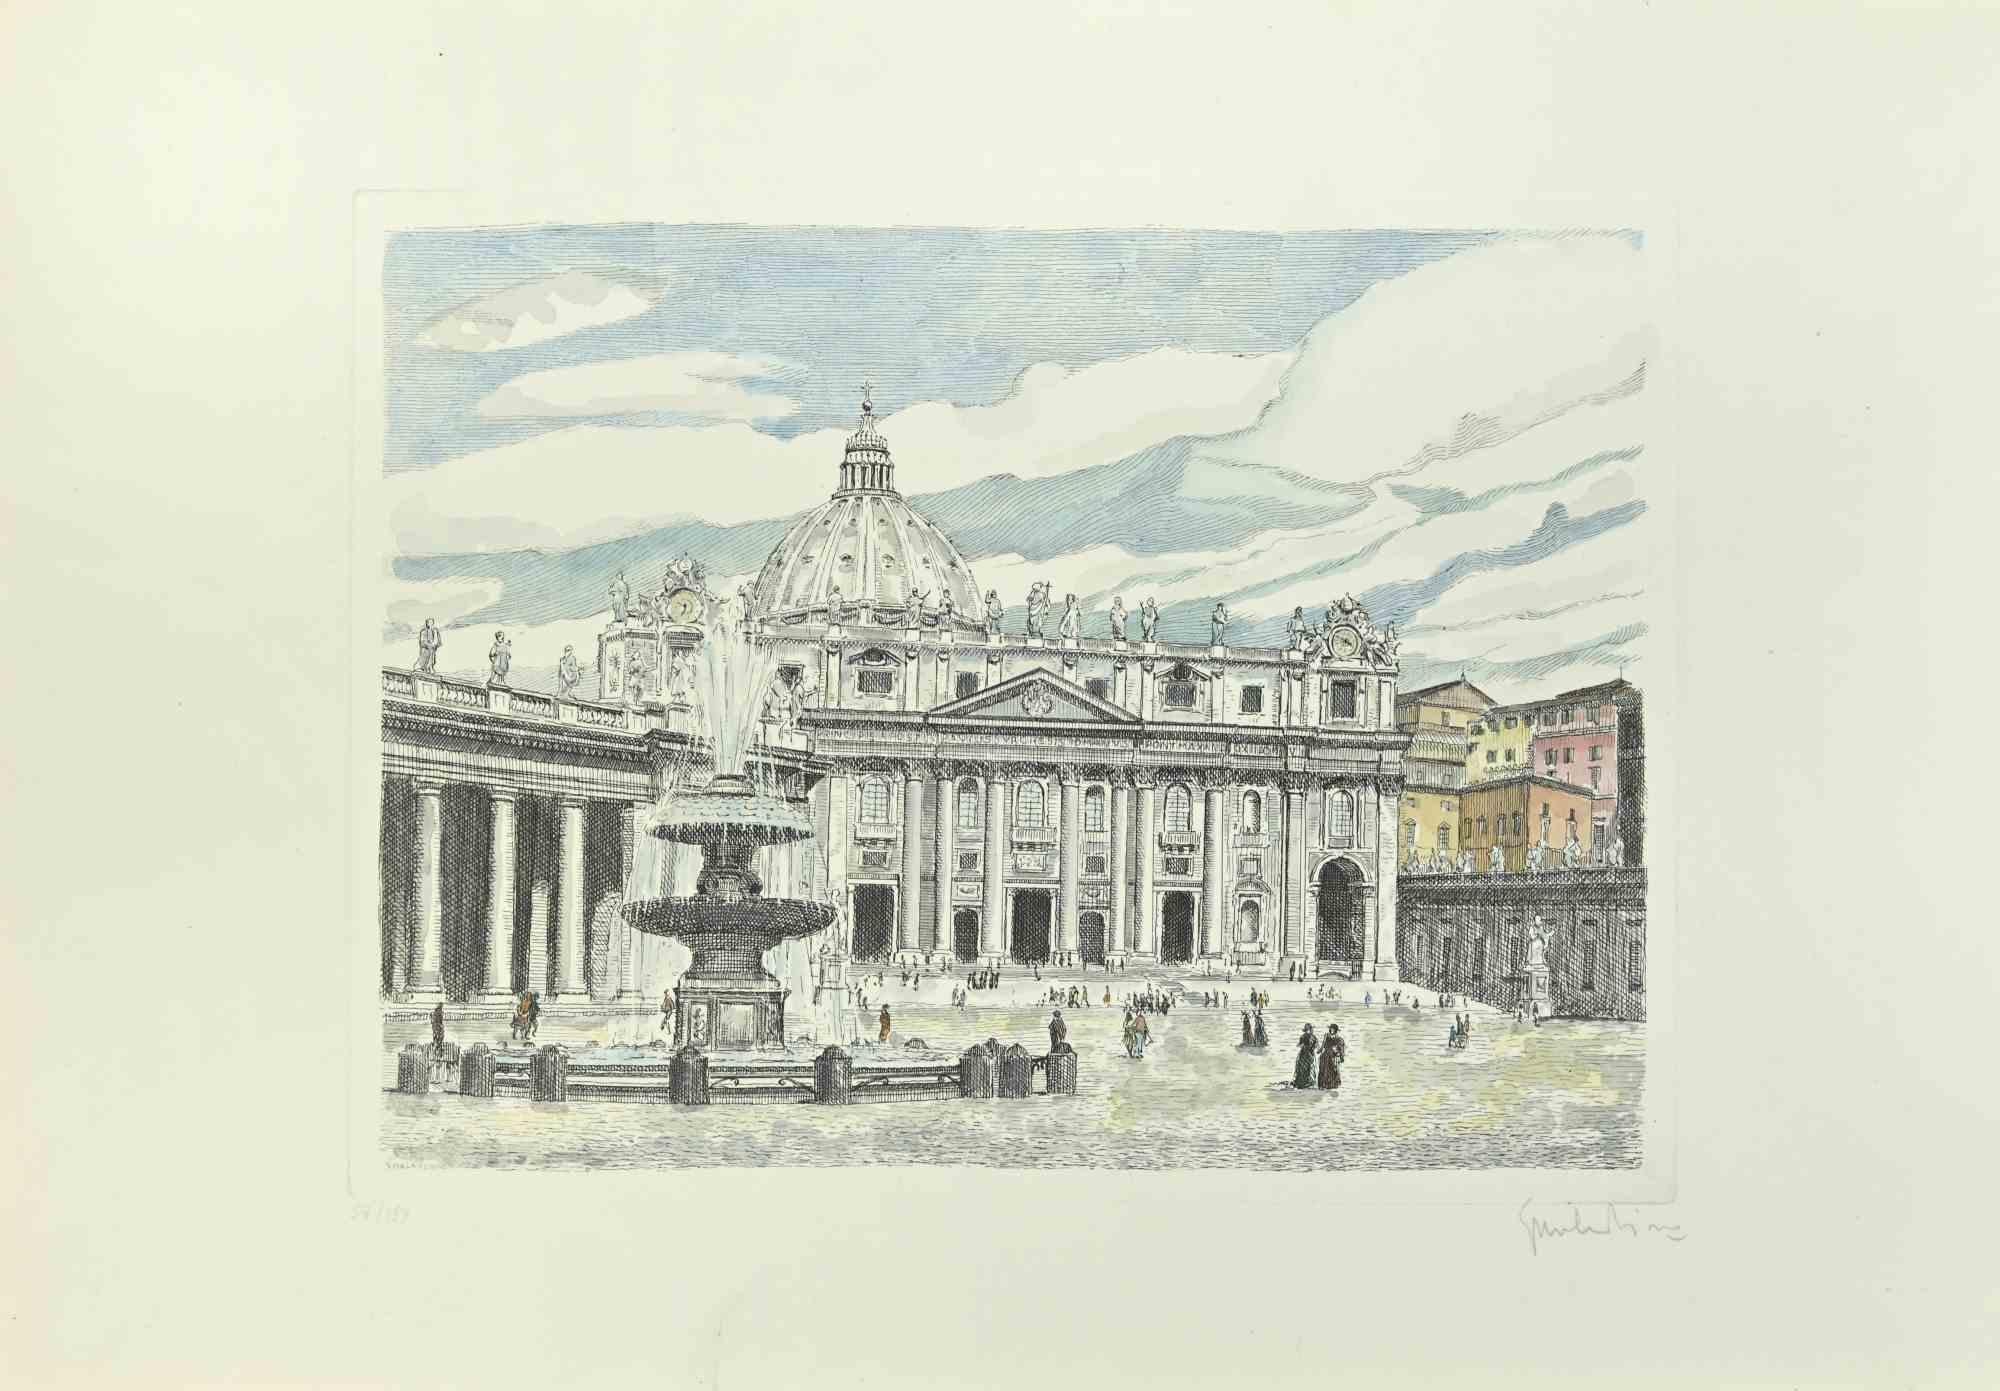 Saint Peter is an artwork realized by Giuseppe Malandrino.

Print in etching technique

Hand-signed by the artist in pencil on the lower right corner.

Numbered edition,57/199.

Good condition.

This artwork represents the beautiful Roman landscape